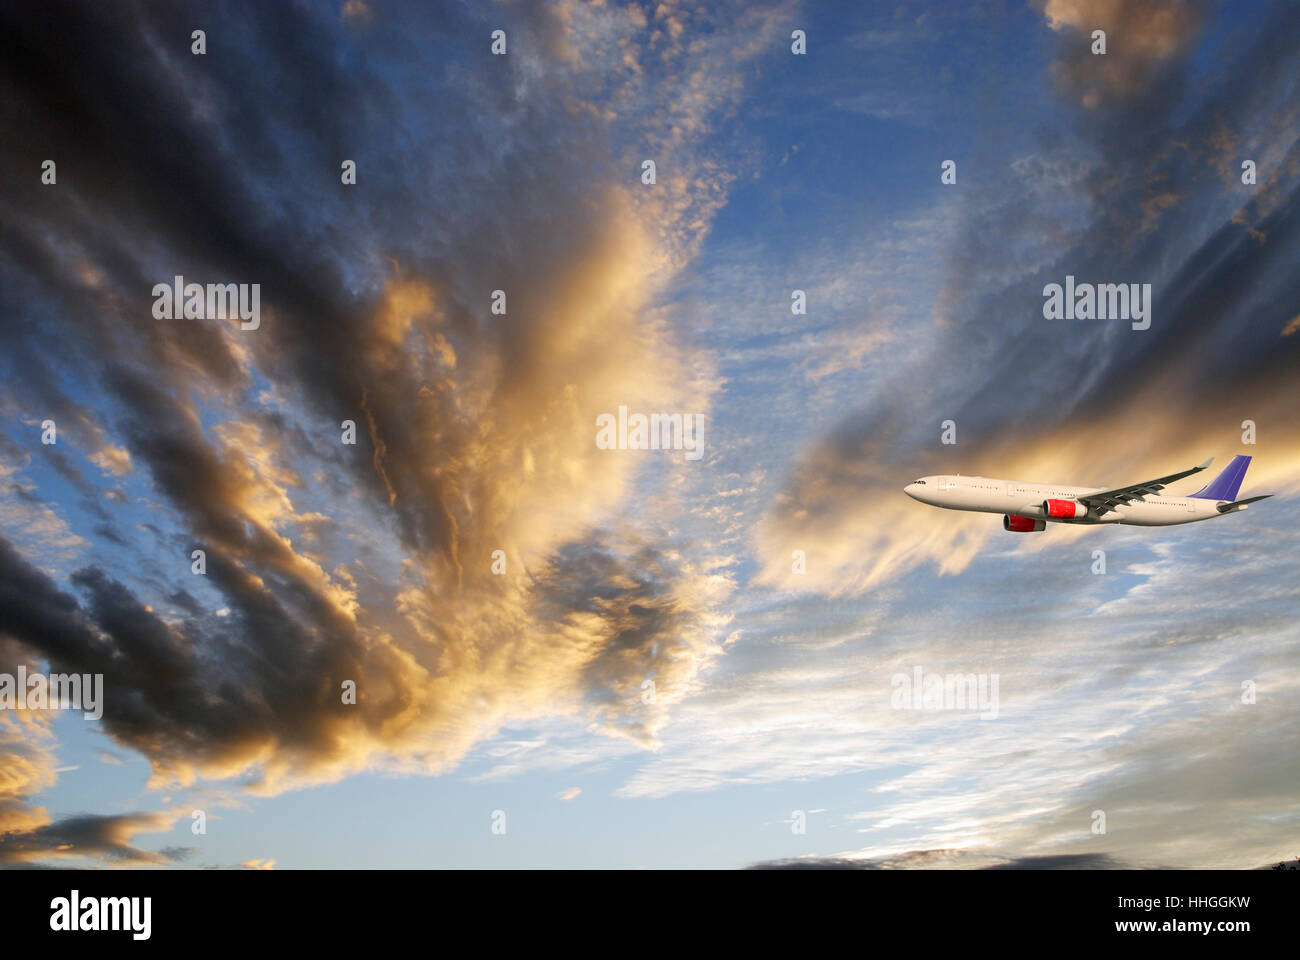 sunset, clouds, aircraft, aeroplane, plane, airplane, fly, flies, flys, flying, Stock Photo